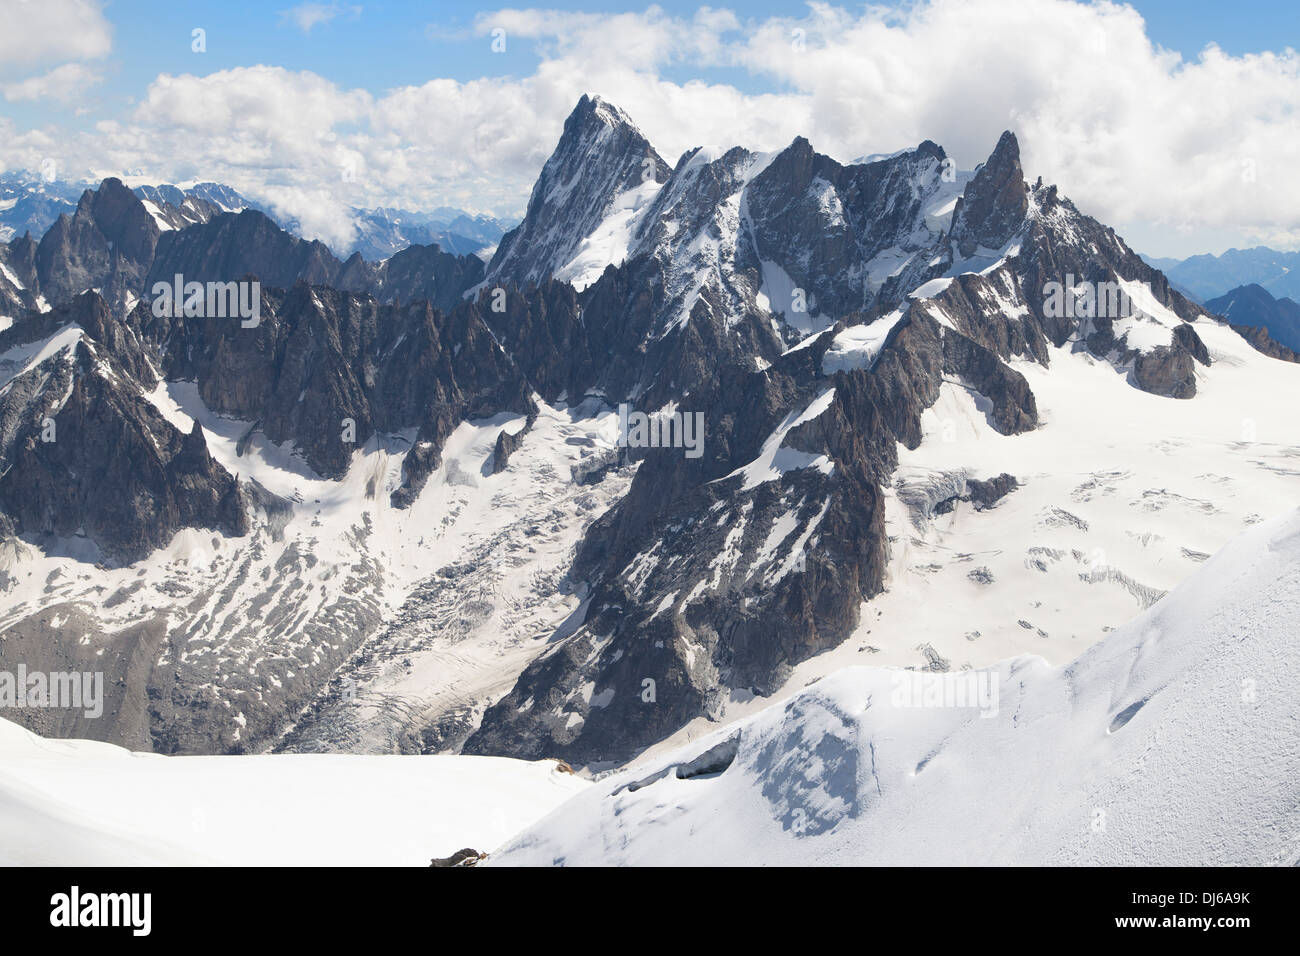 Grandes Jorasses and Dent du Geant mountains in the Mount Blanc massif, French Alps. Stock Photo